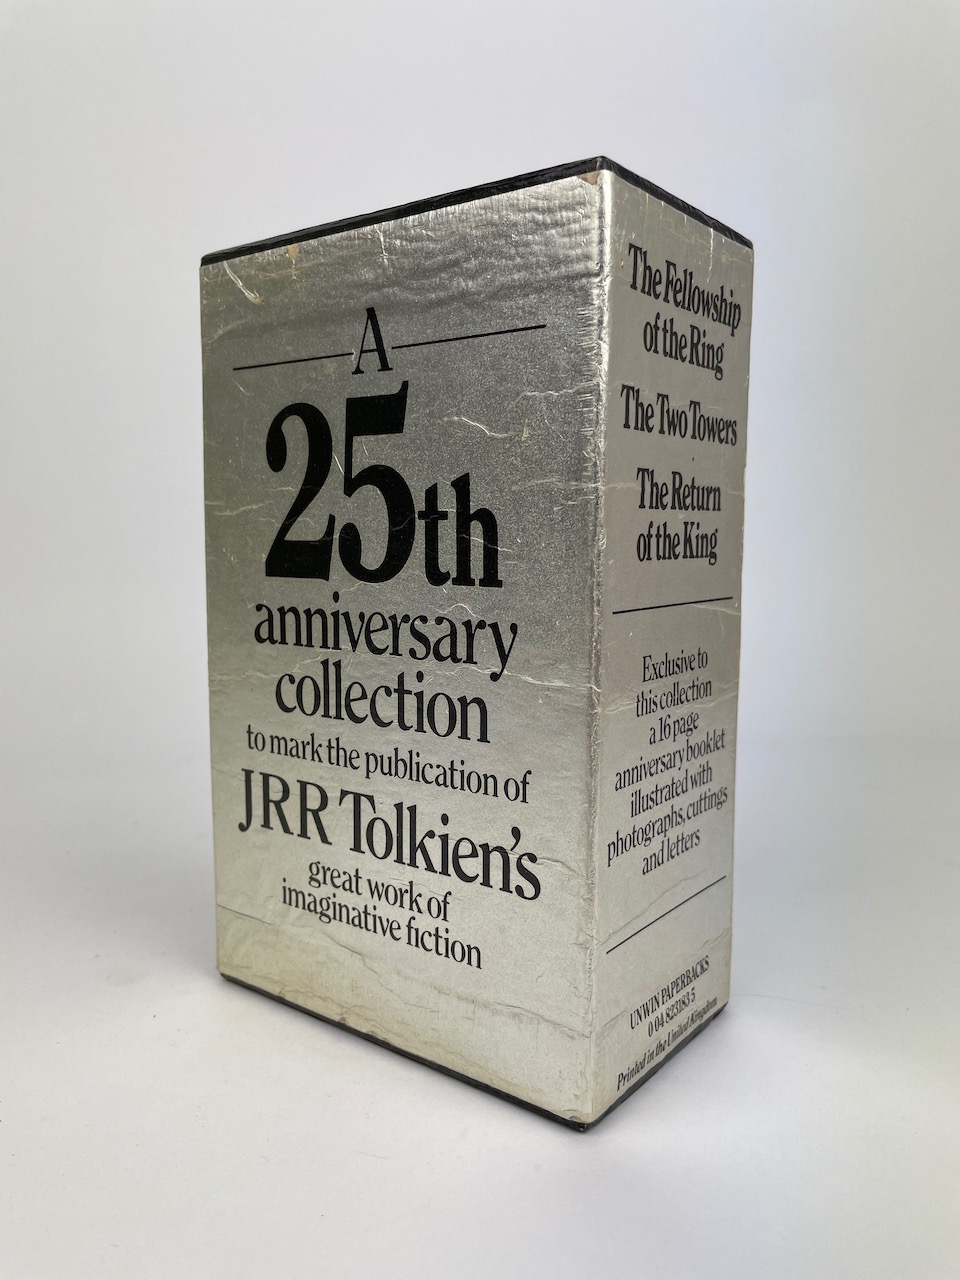 The Lord of the Rings 25th Anniversary Collection from 1980 by Unwin Paperbacks